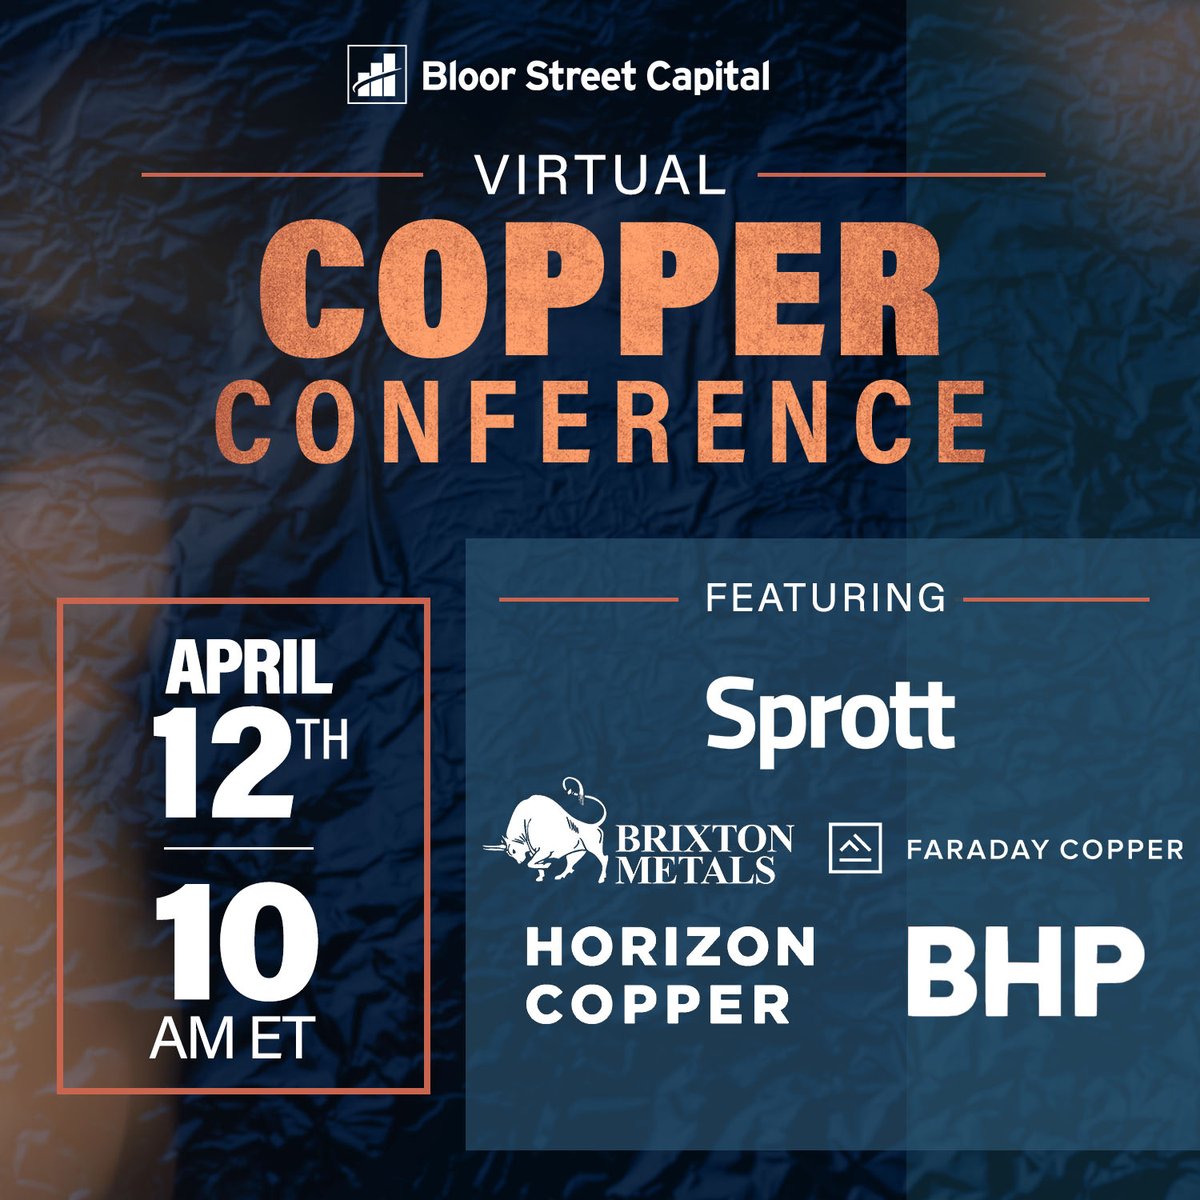 If you have an interest in learning about #copper and how it will contribute to the #energytransition movement then join us for our Virtual Copper Conference. Register at bit.ly/3VQrrje